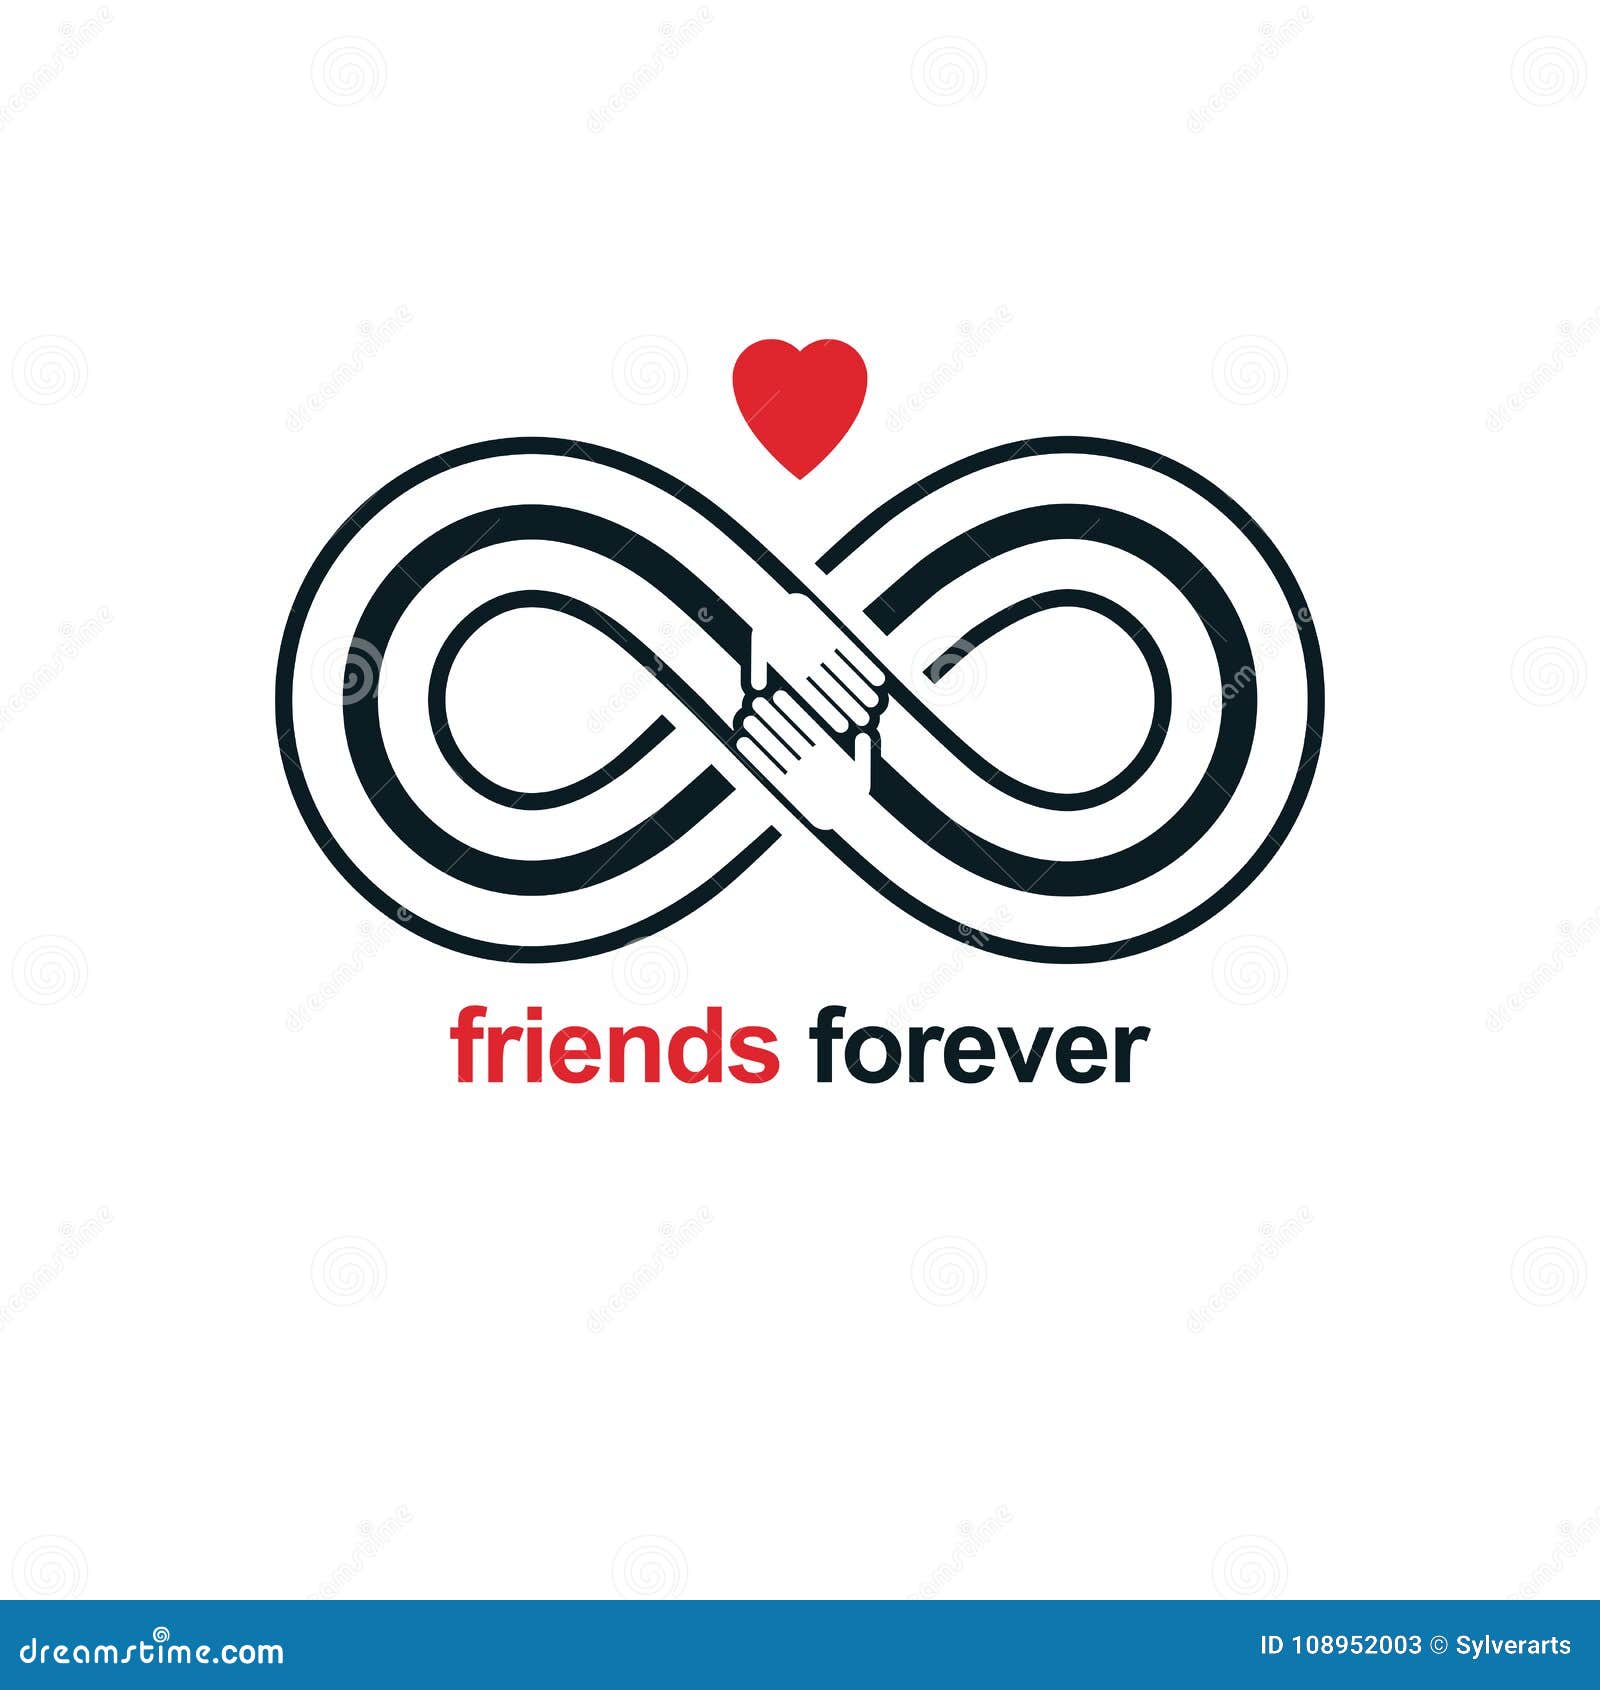 Premium Vector | Friendship day hand drawn lettering. friends forever.  vector elements for invitations, posters, greeting cards. t-shirt design